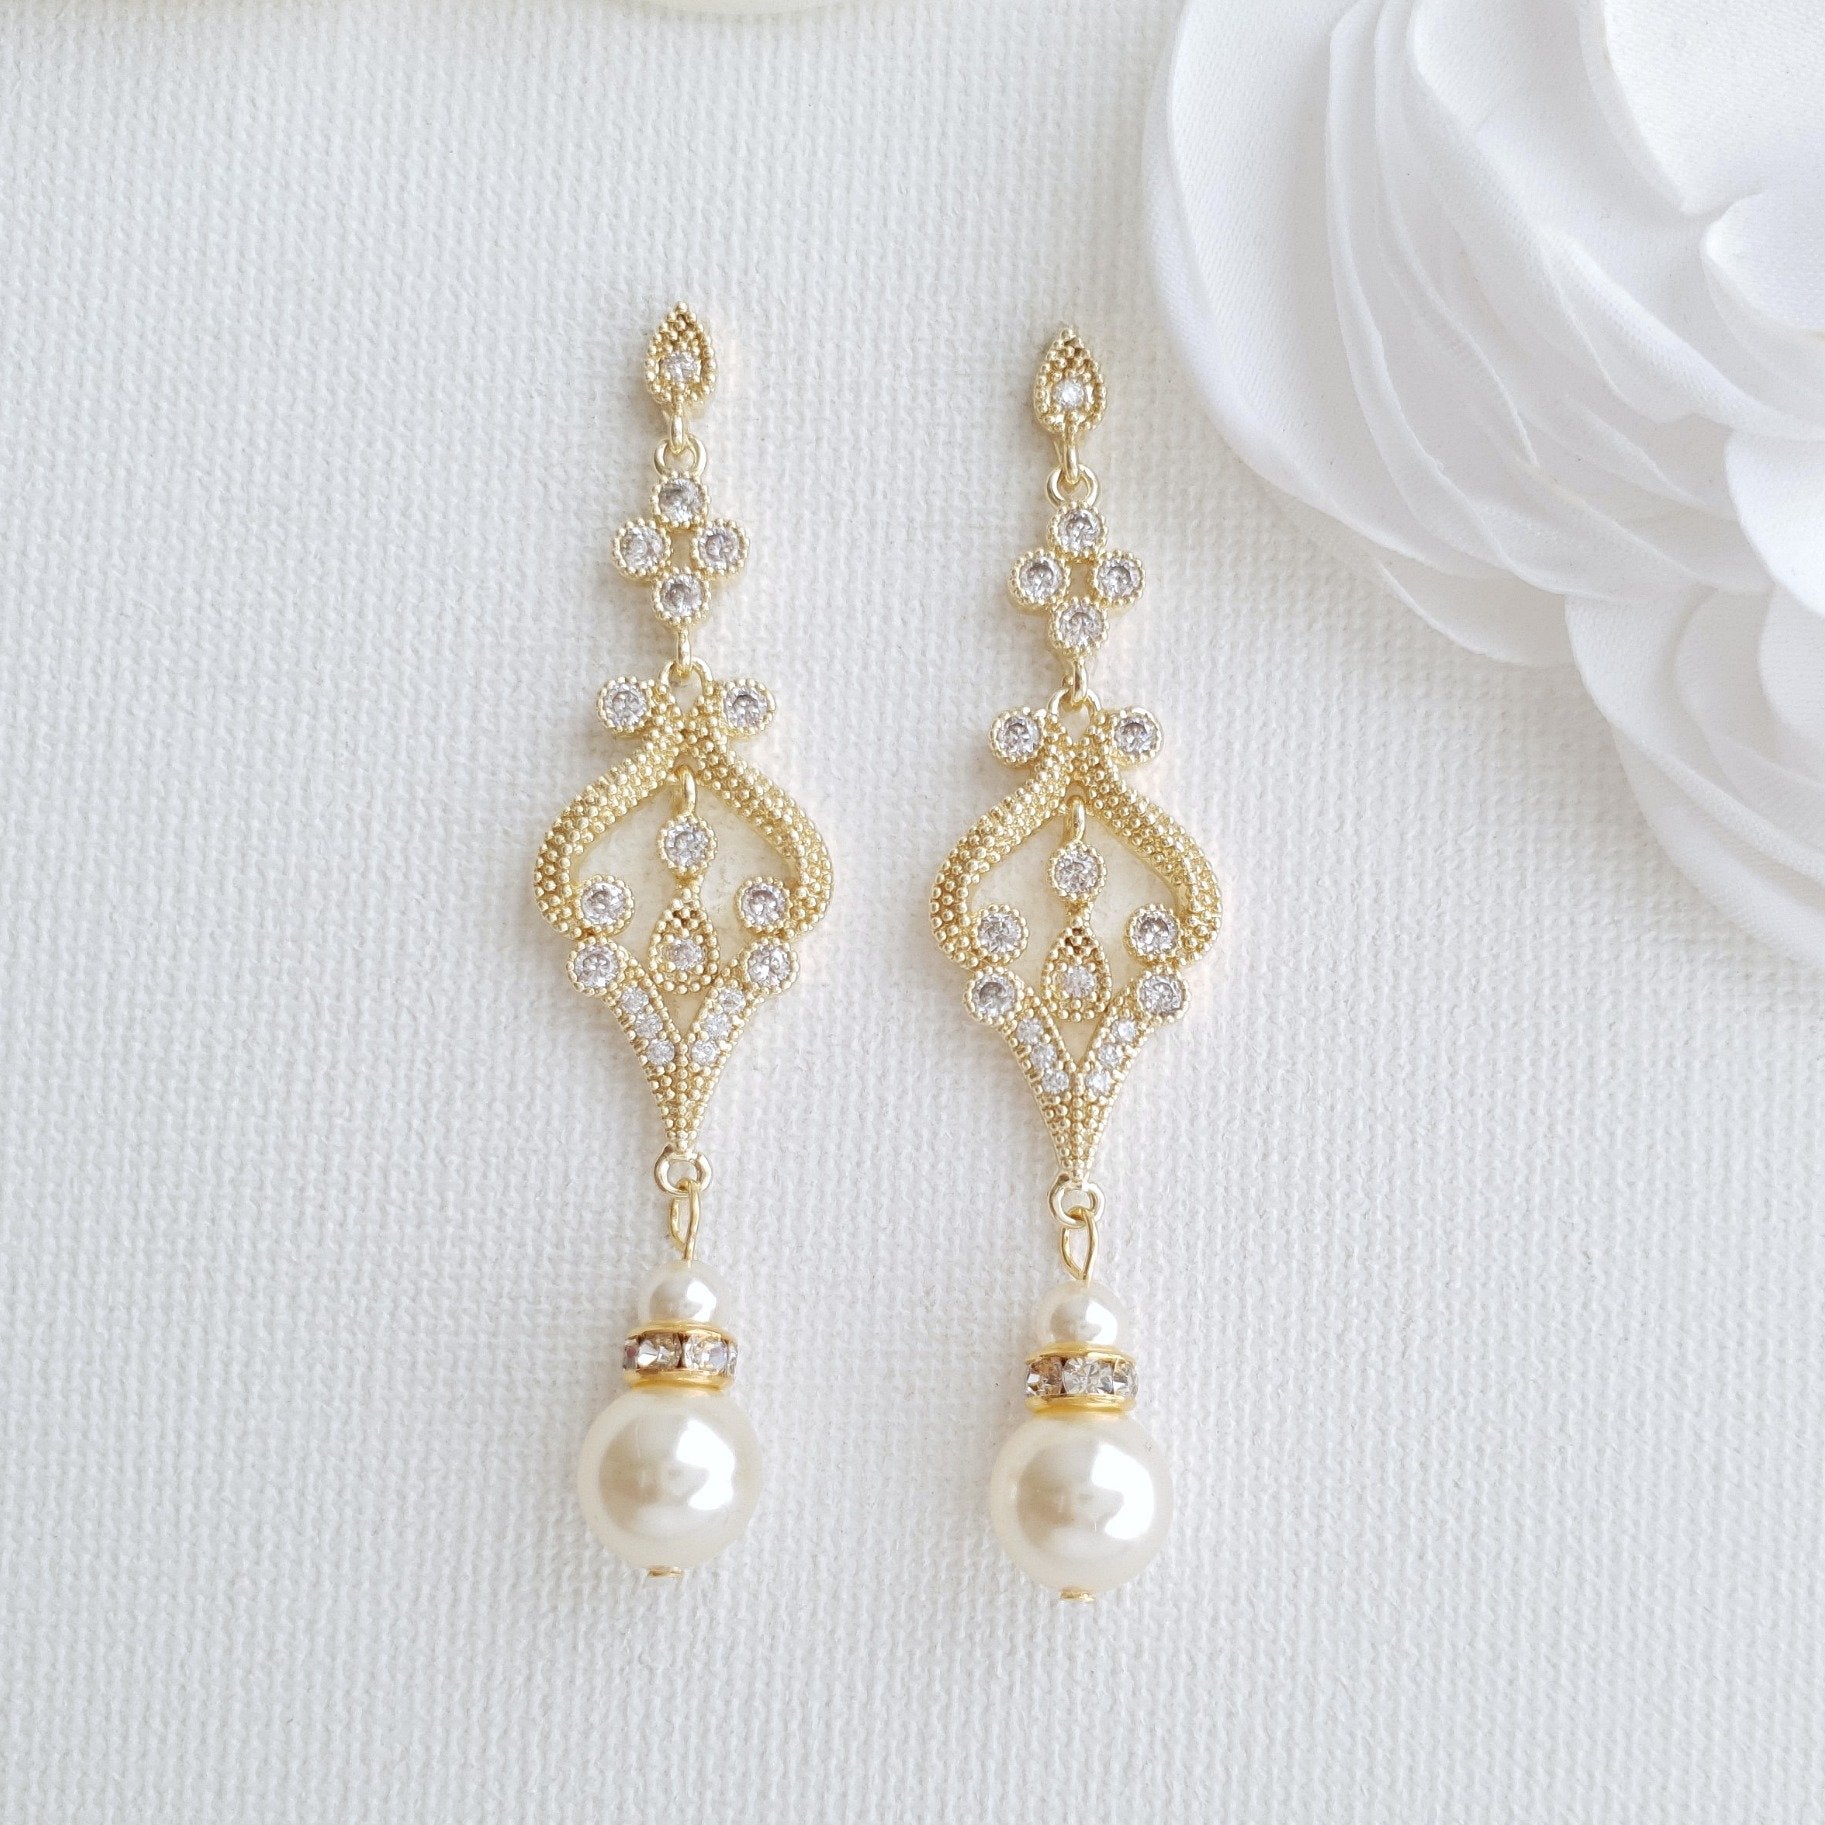 Gold Bridal Earrings With Pearl Drops for Brides & Bridesmaids –  PoetryDesigns